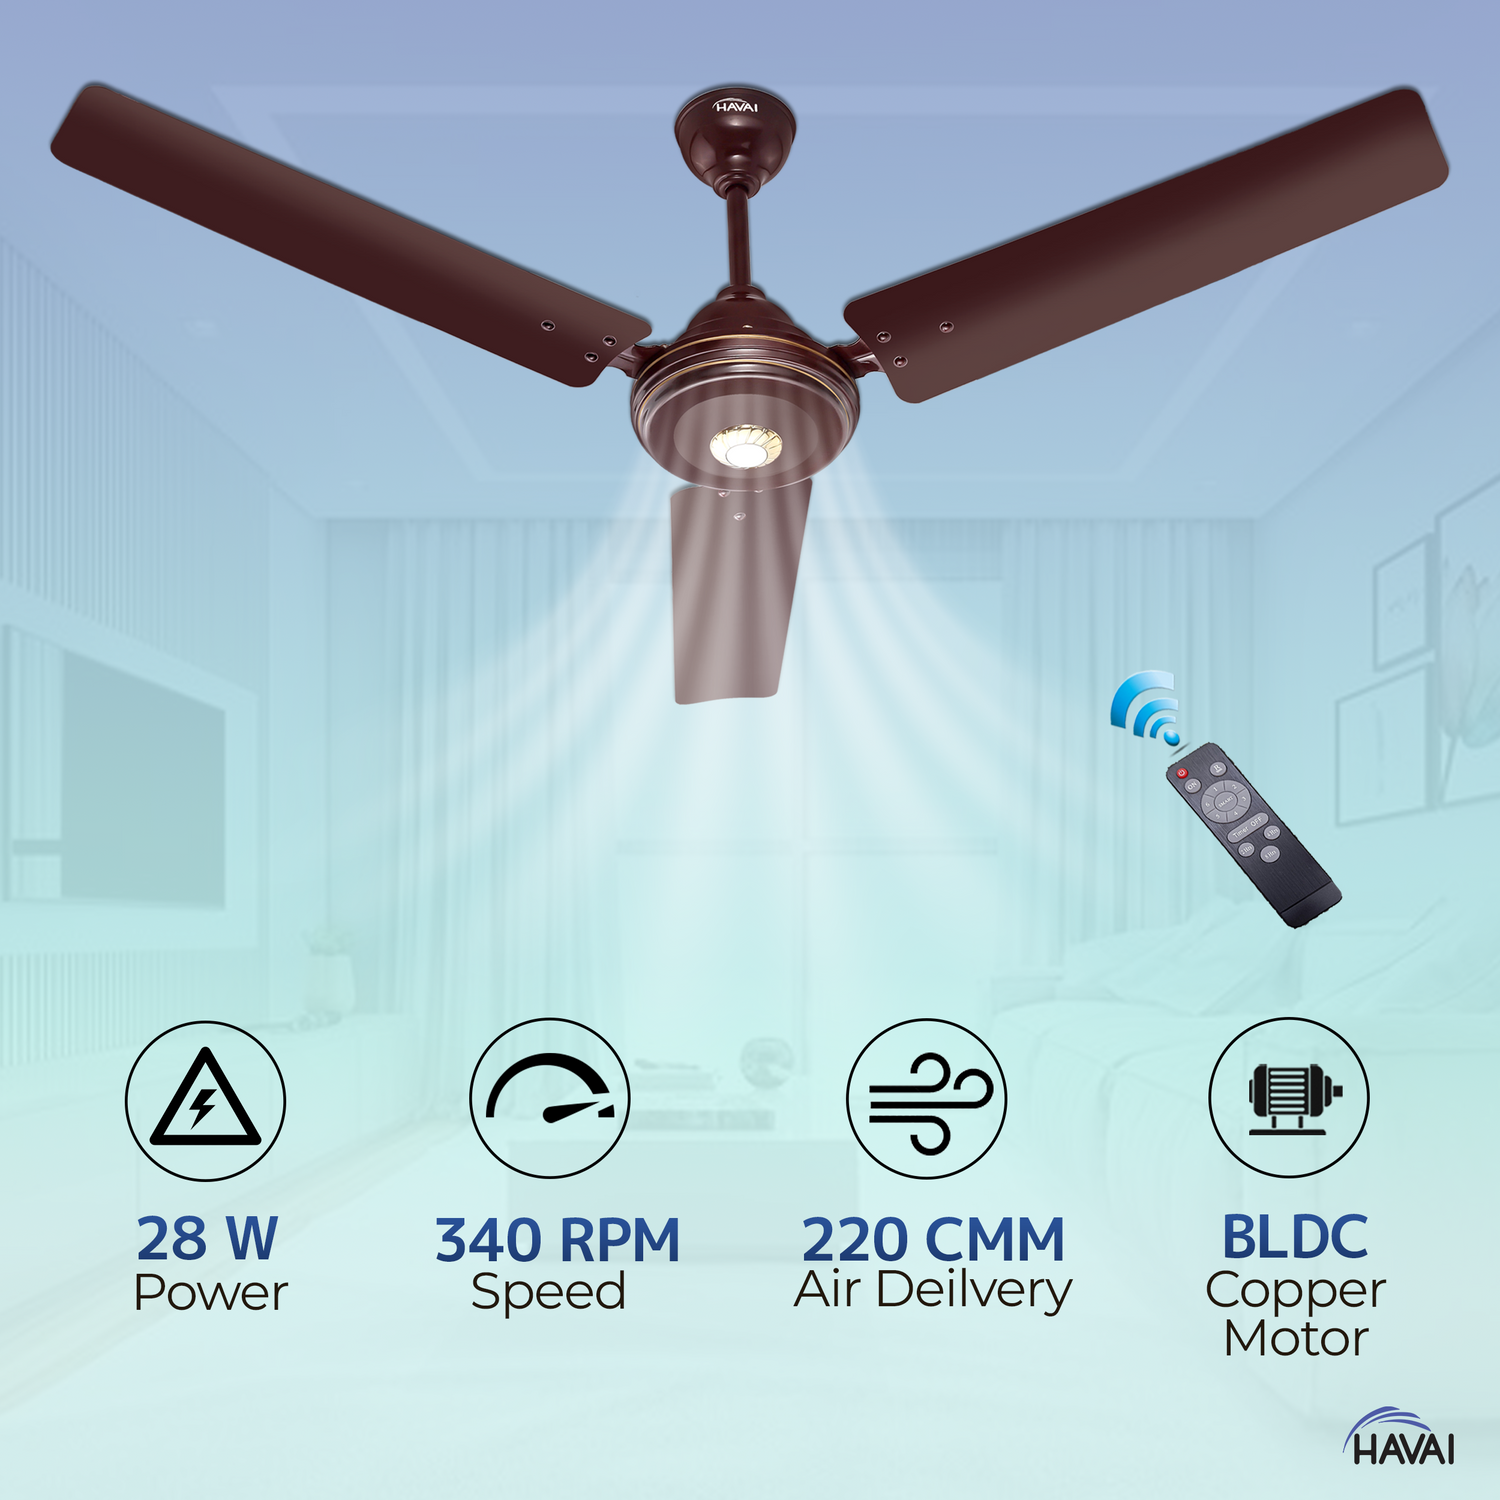 HAVAI Spinel BLDC Ceiling Fan 28W, 1200mm Blade with Remote - CHERRY BROWN